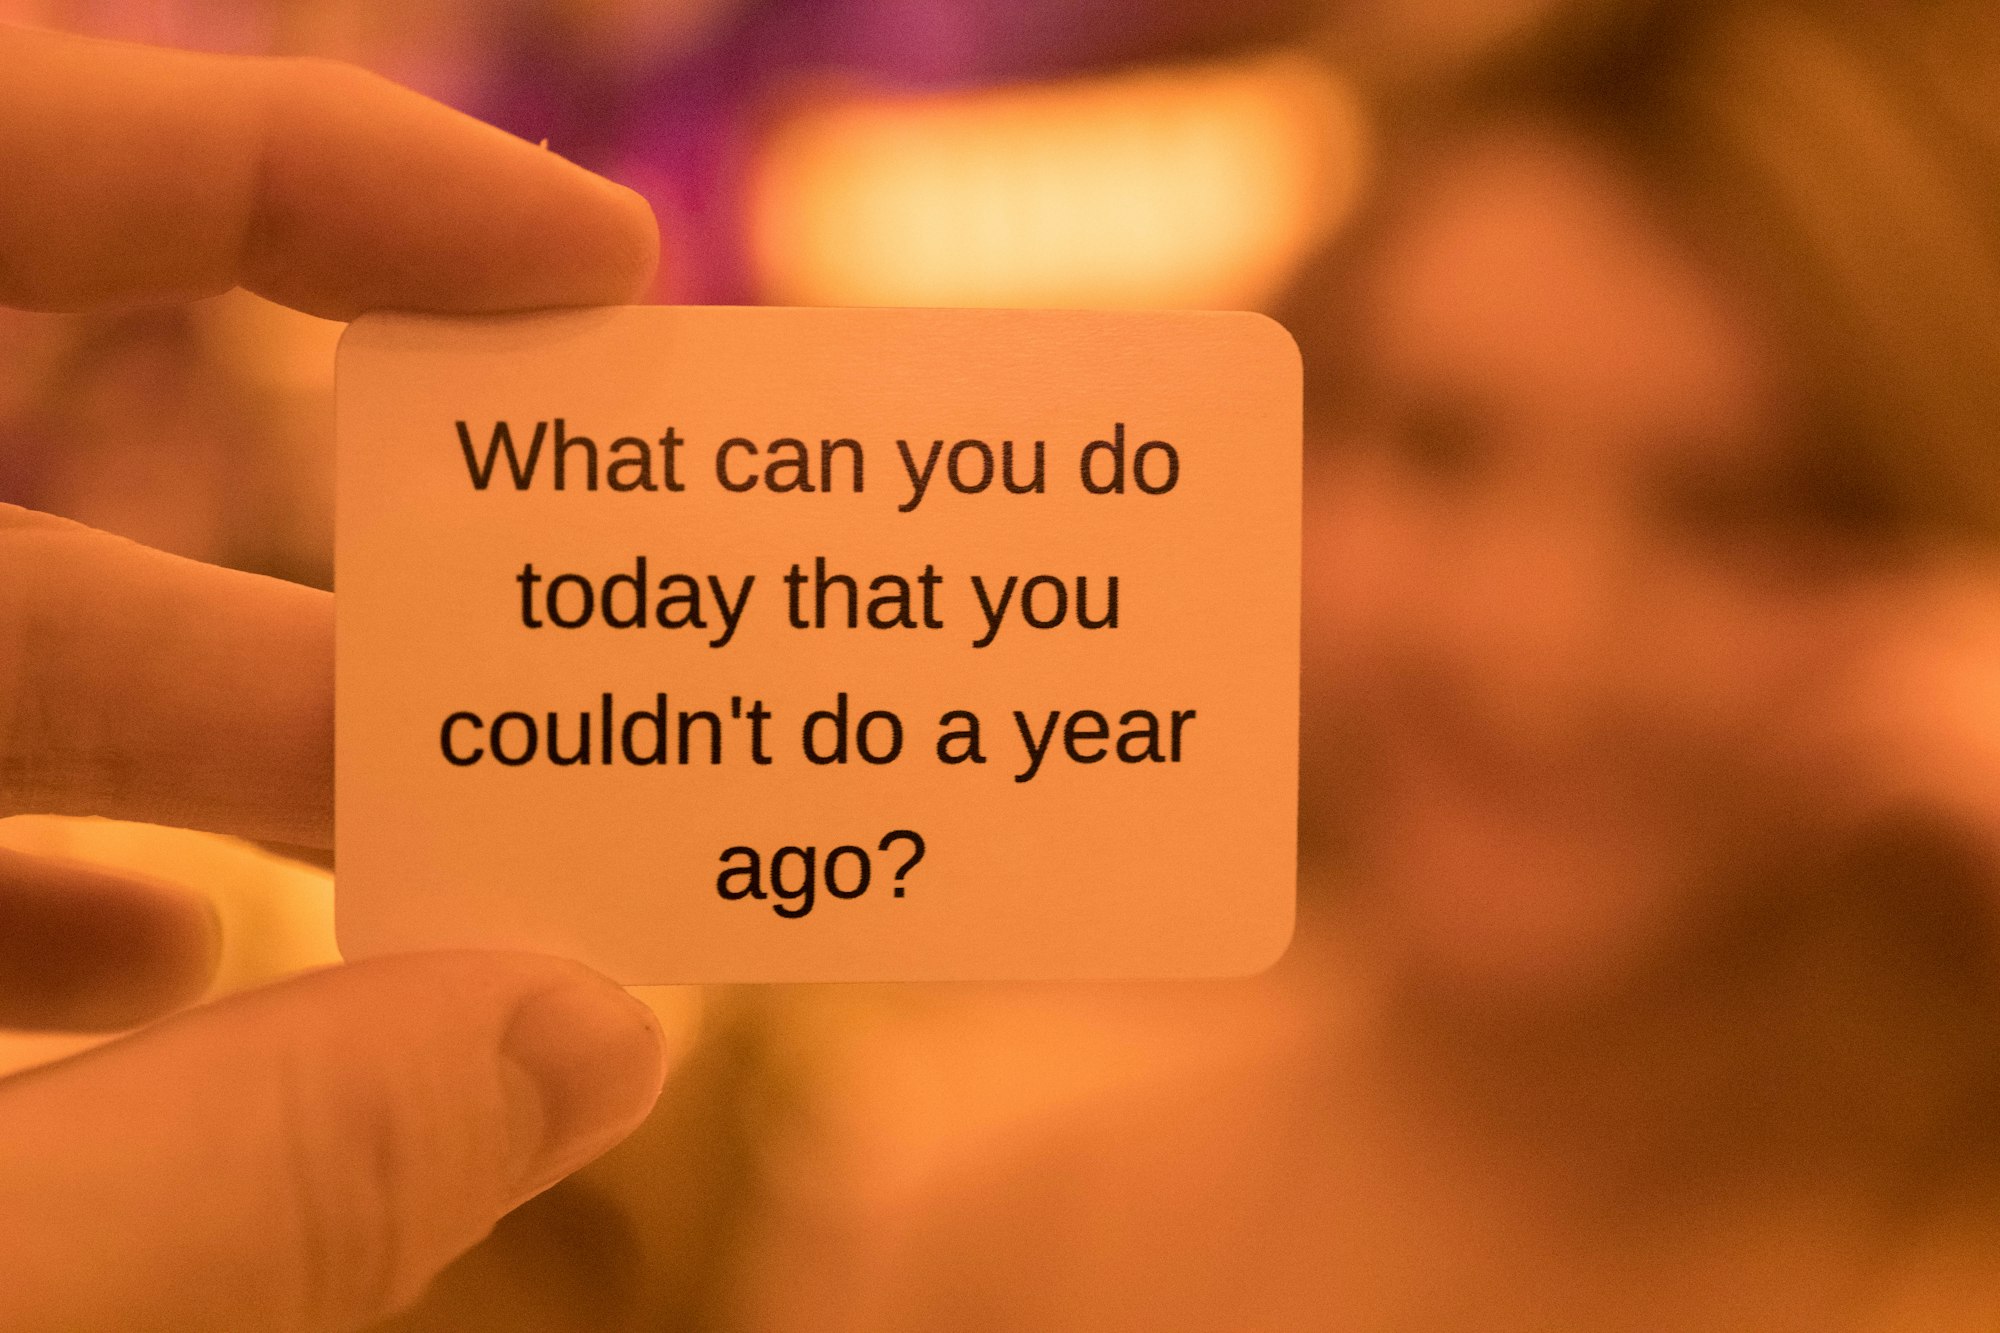 Fingers hold a small card that says, "What can you do today that you couldn't do a year ago?"